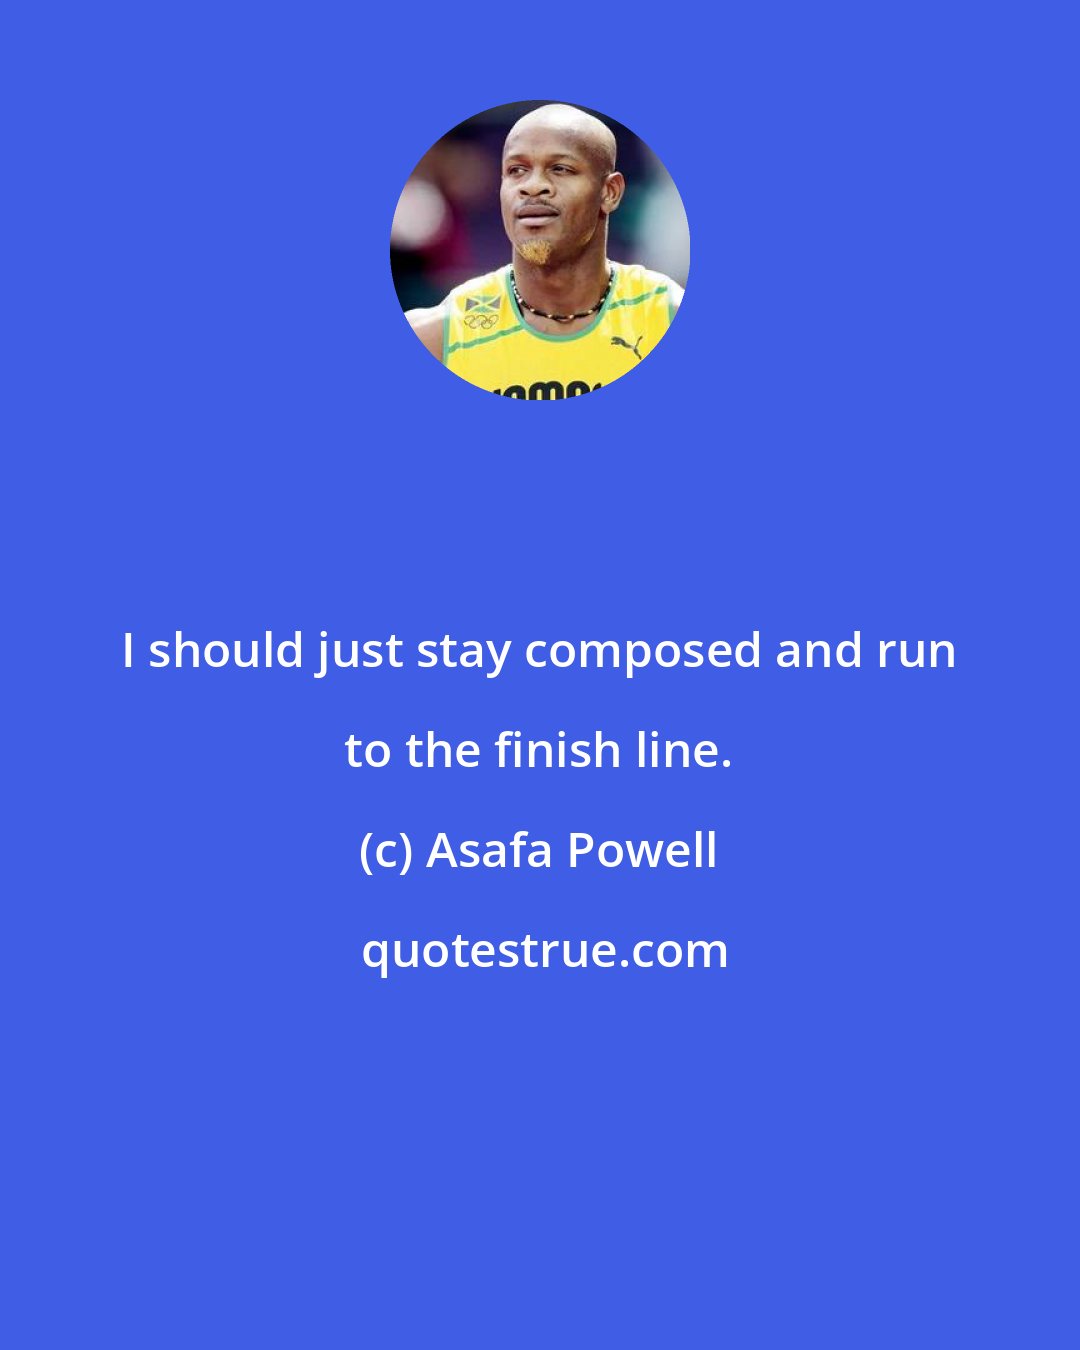 Asafa Powell: I should just stay composed and run to the finish line.